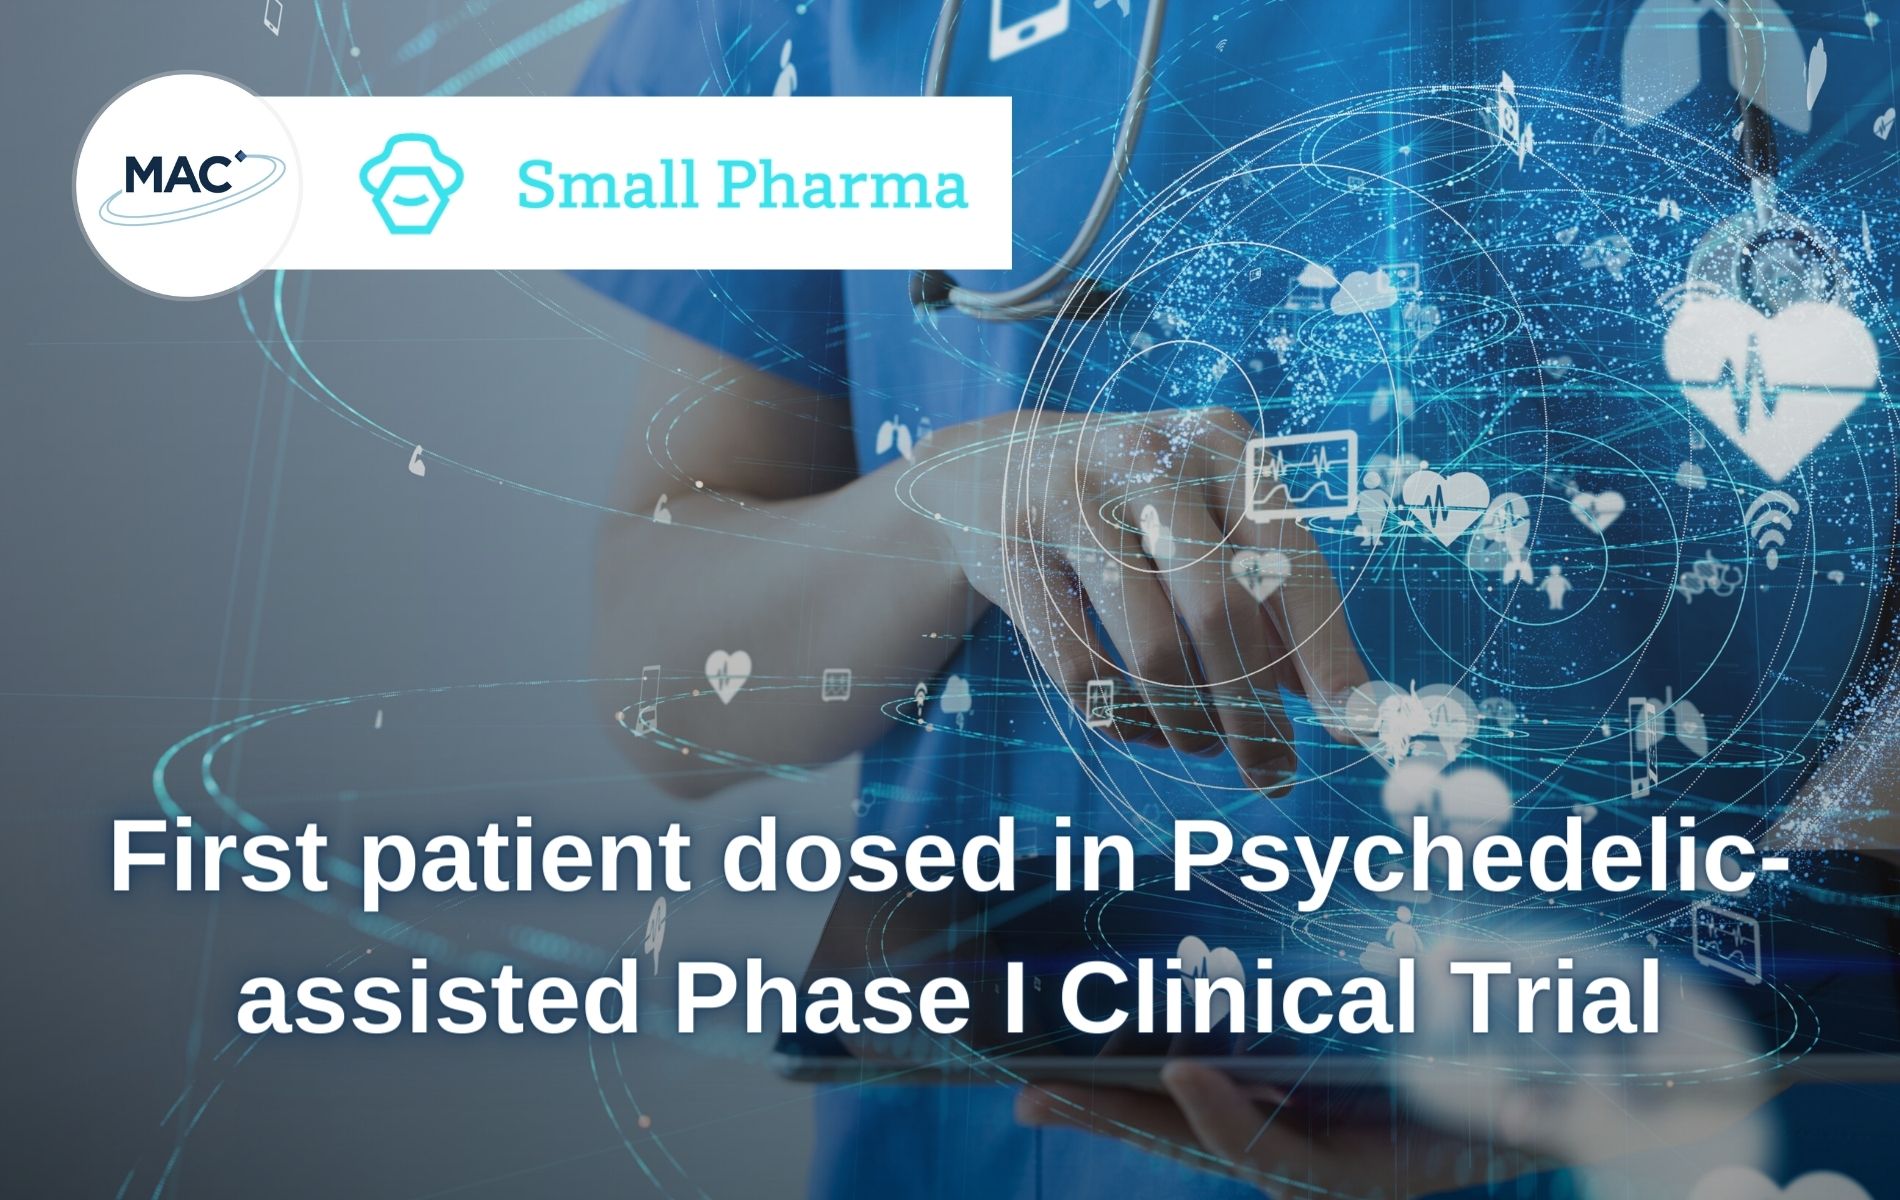 First patient dosed in Psychedelic-assisted Phase I Clinical Trial